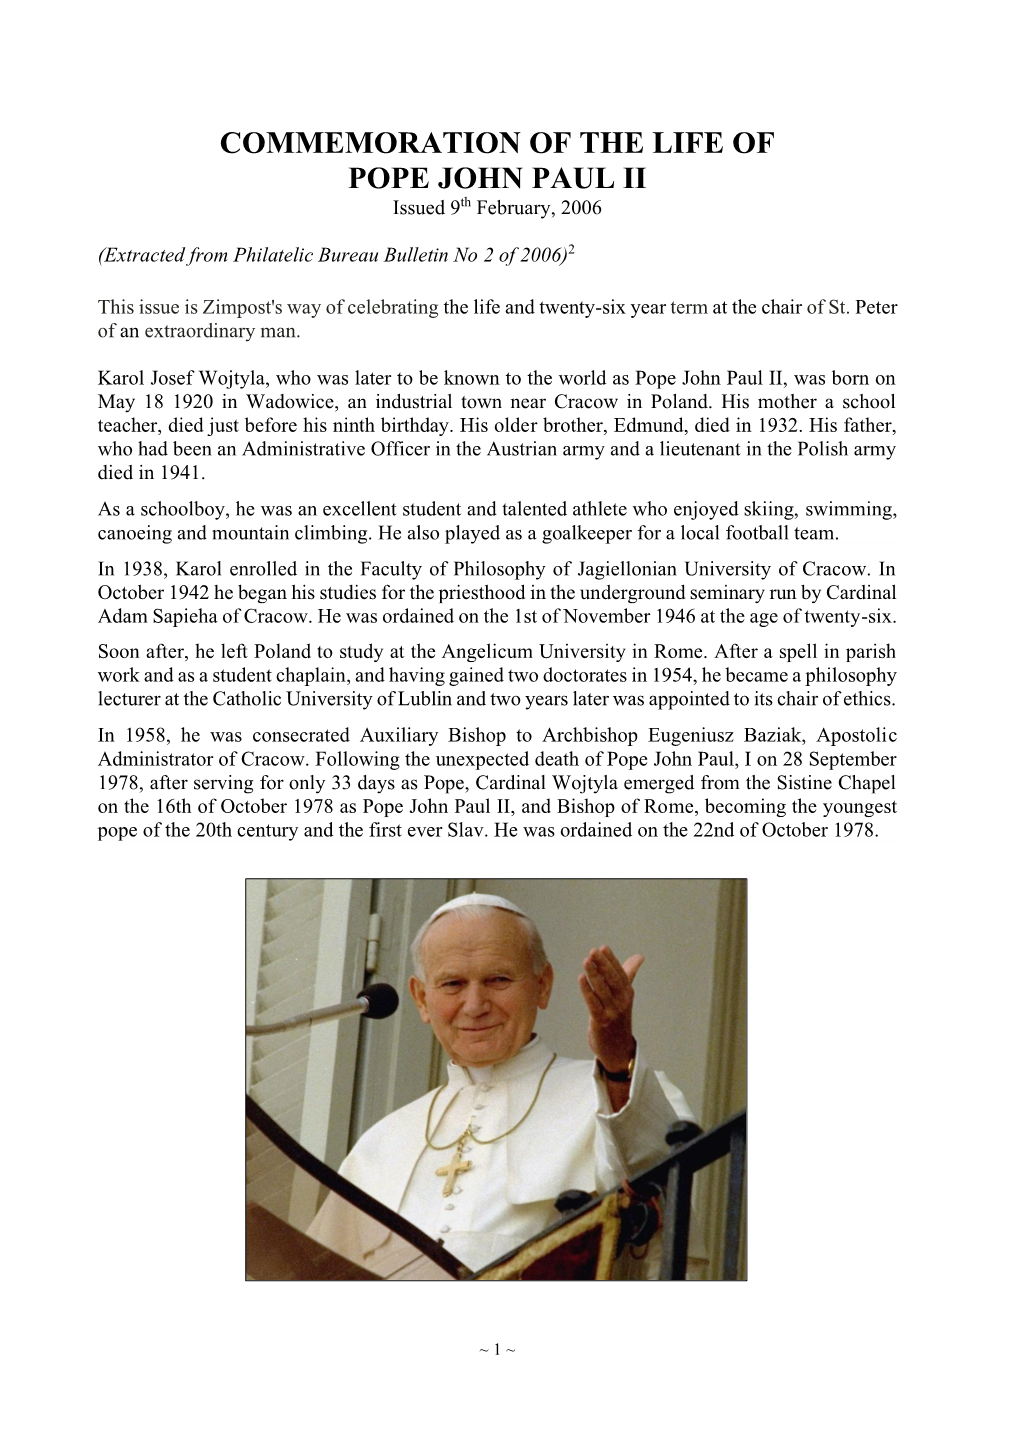 COMMEMORATION of the LIFE of POPE JOHN PAUL II Issued 9Th February, 2006